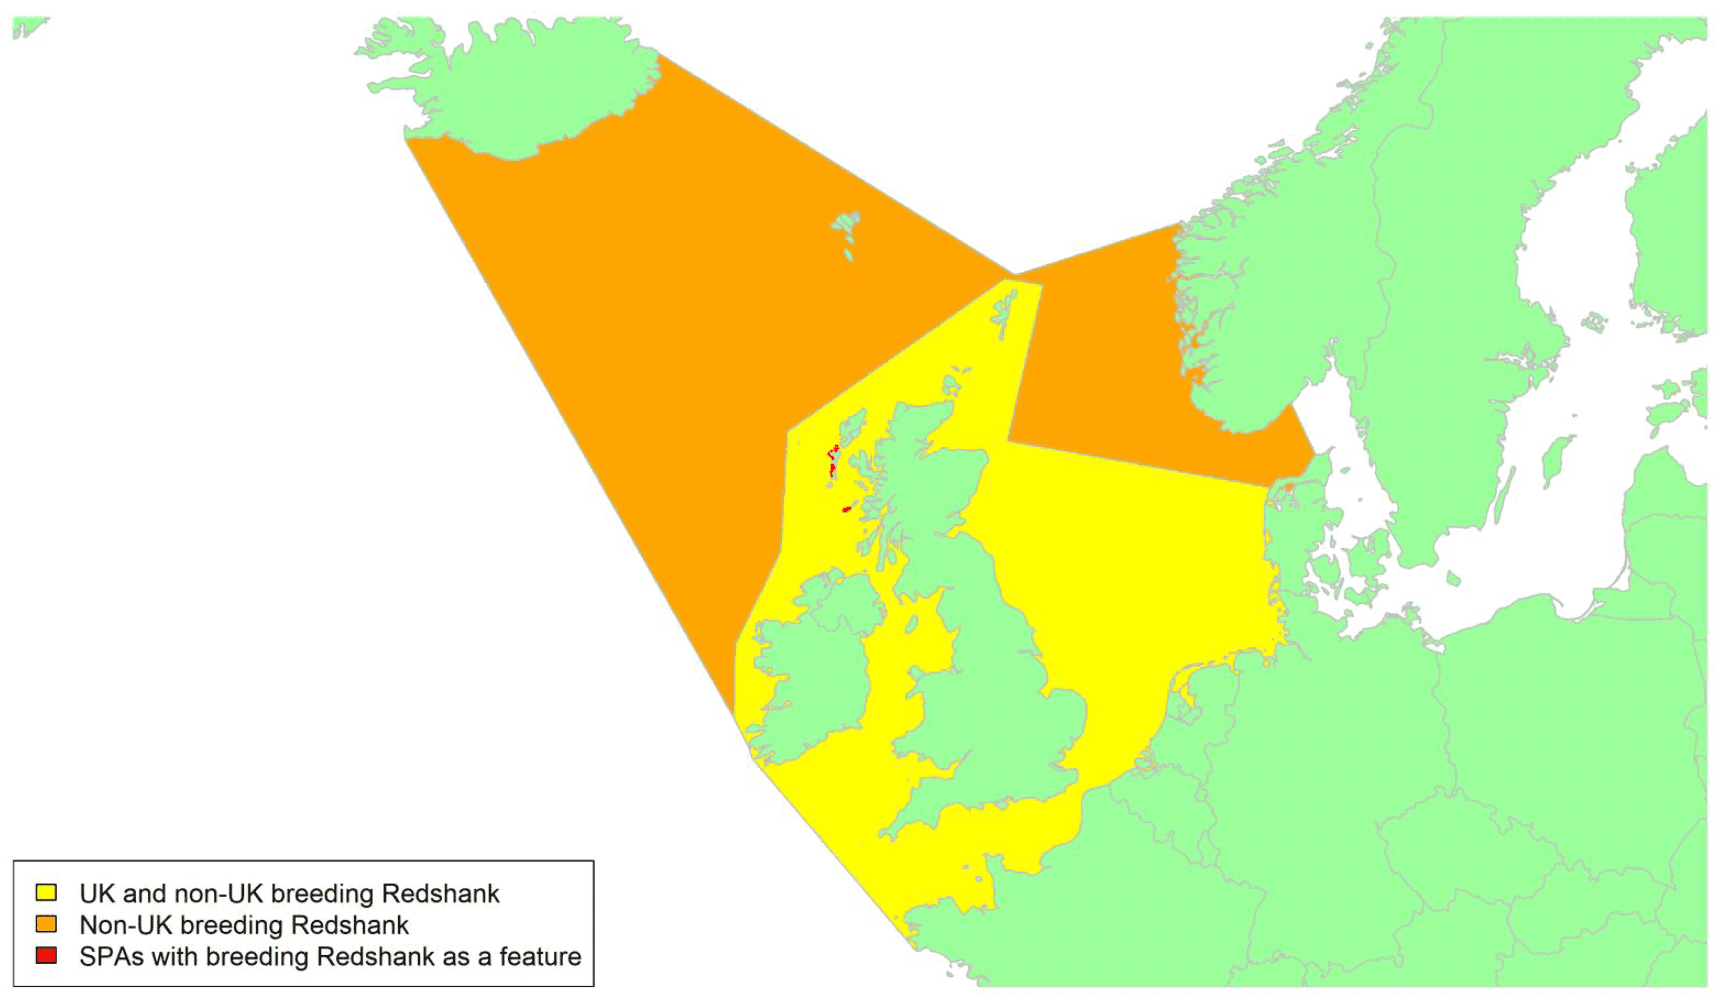 Map of North West Europe showing migratory routes and SPAs within the UK for breeding Redshank as described in the text below.